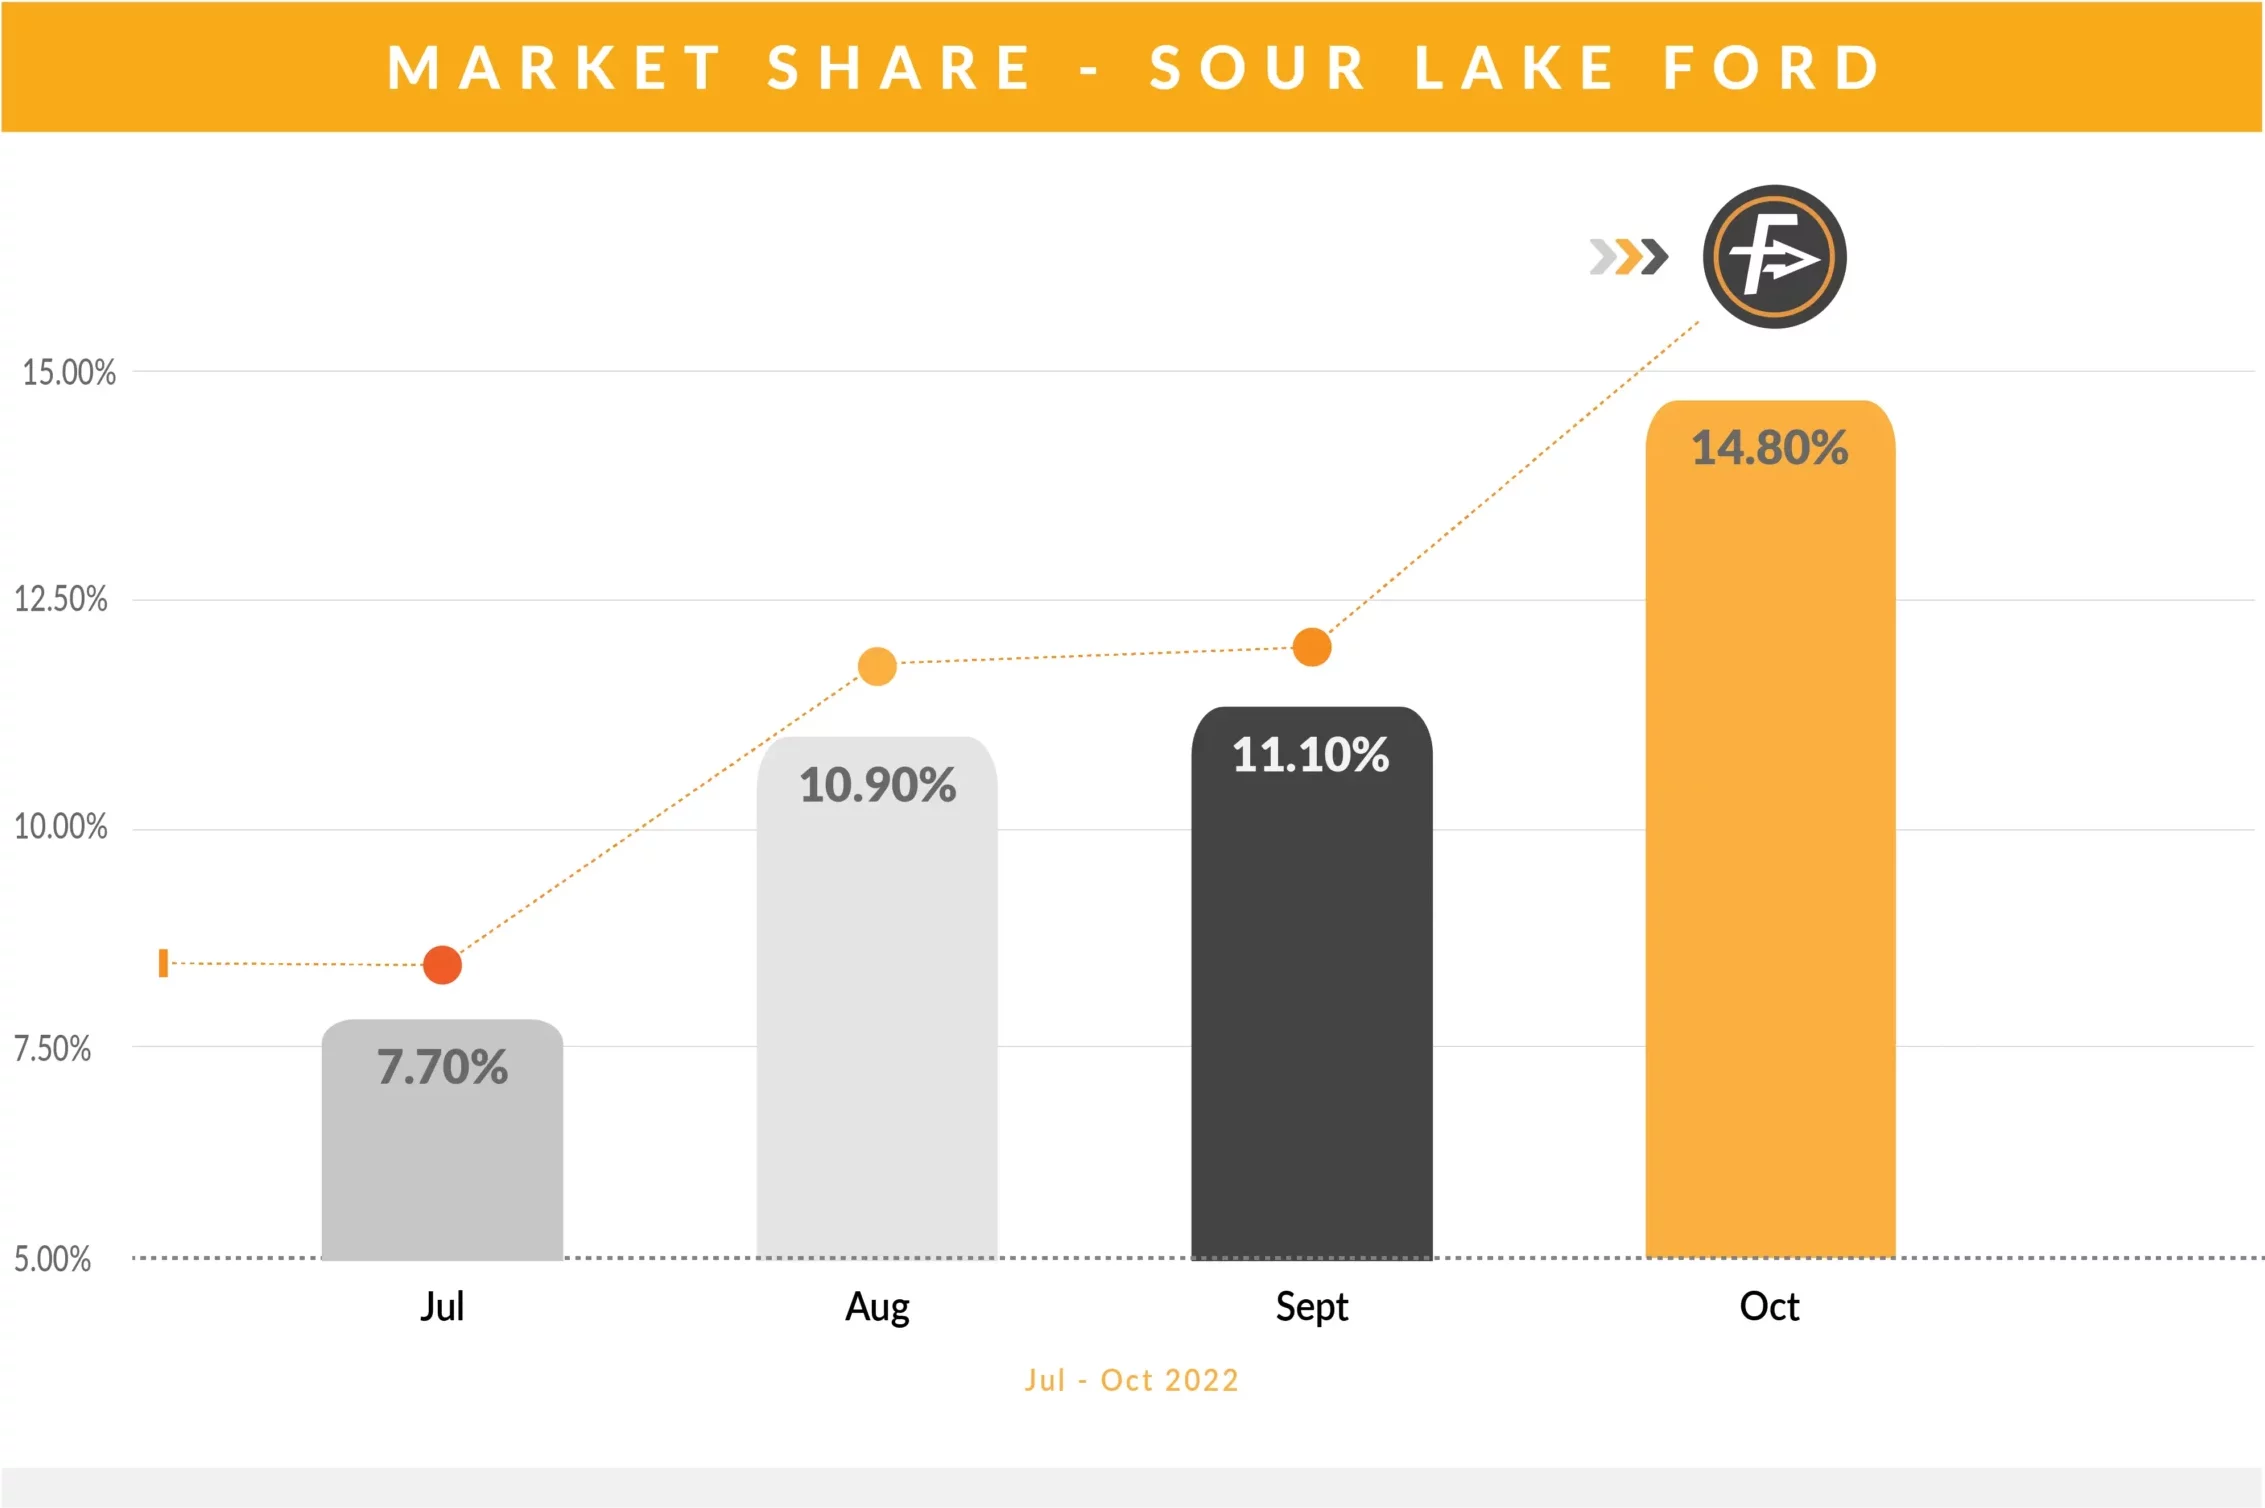 FF Market Share - Sour Lake Ford (1)